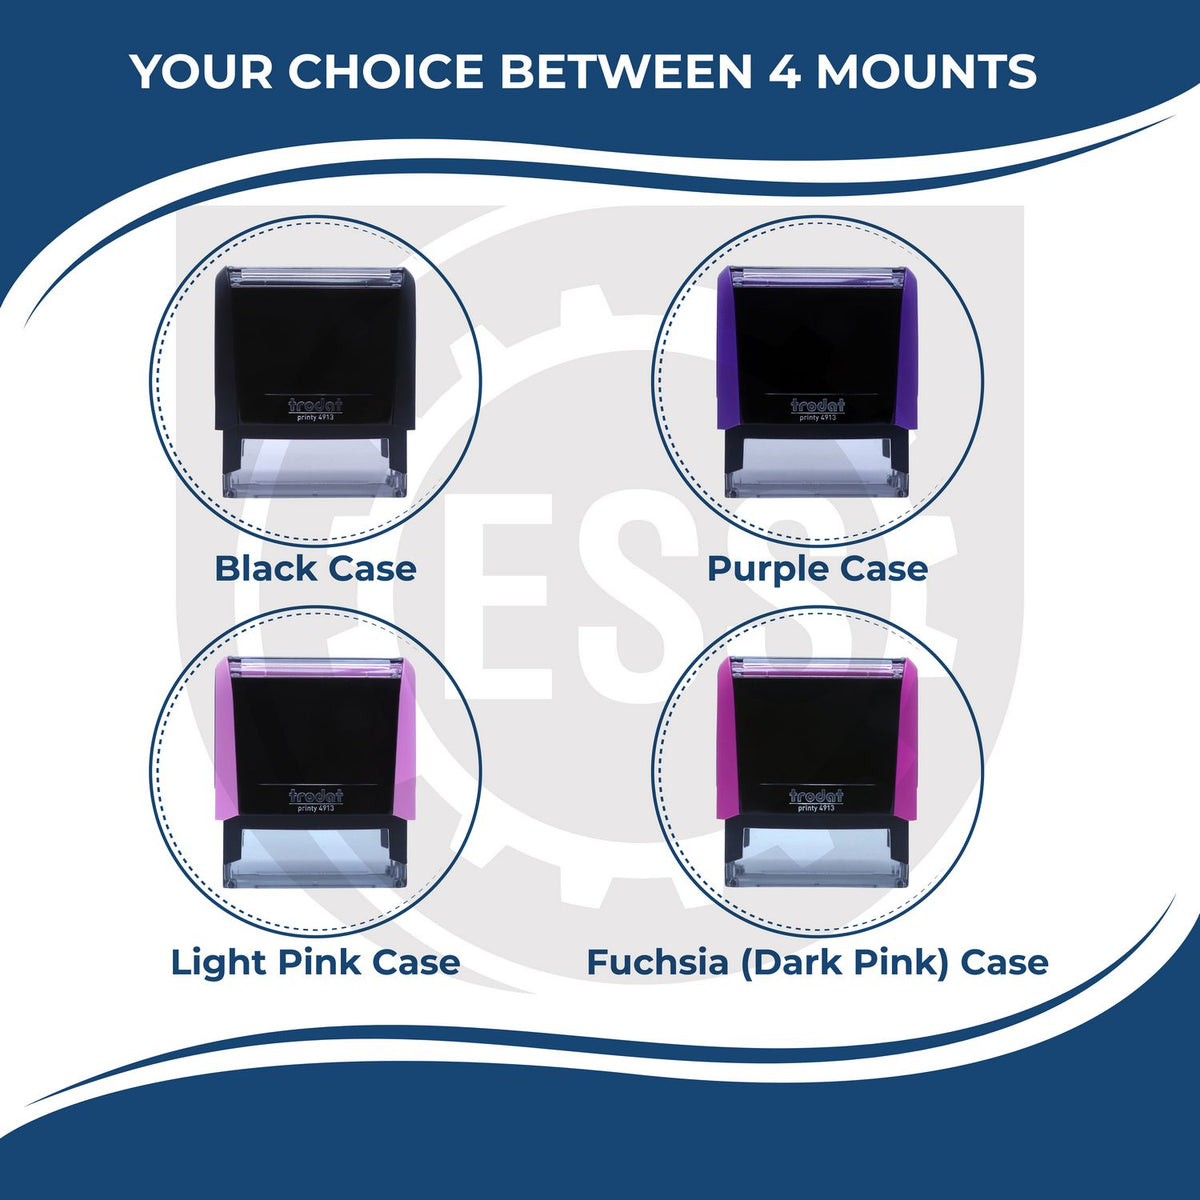 A picture of different colored mounts for the Self-Inking State Seal Kentucky Notary Stamp featurning a Red, Blue or Black Mount